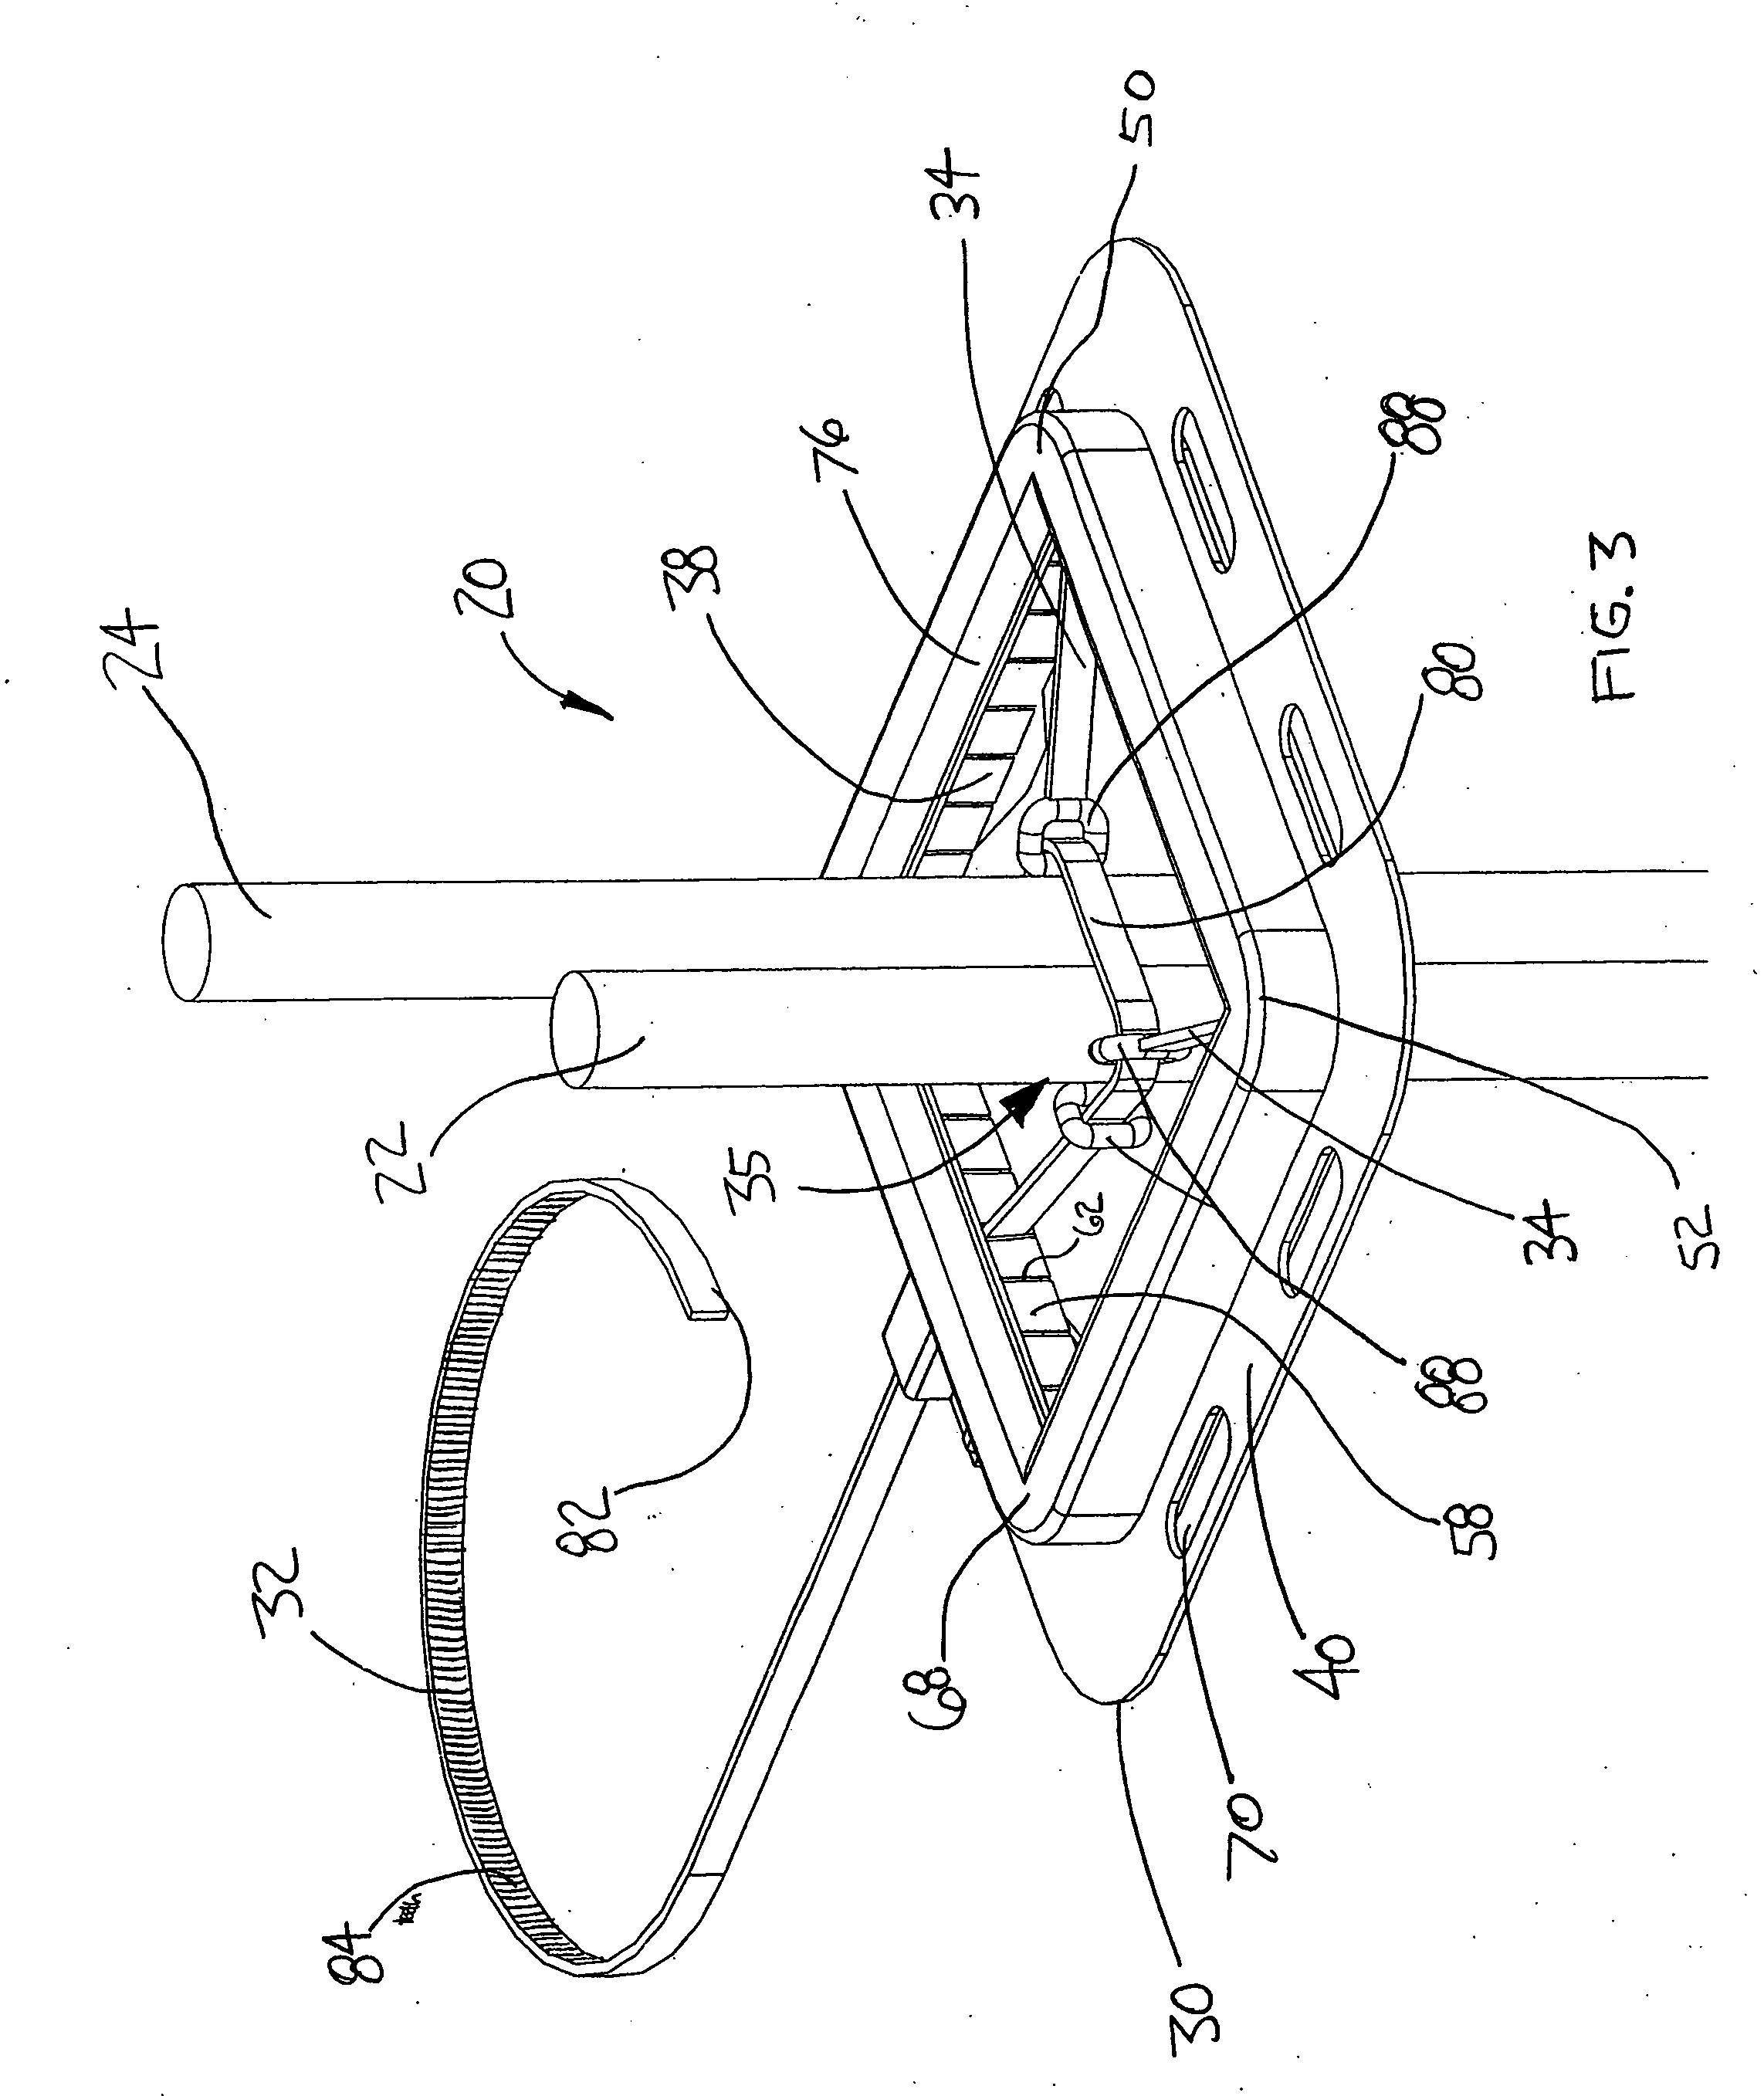 Device for tying and centering reinforcing bar